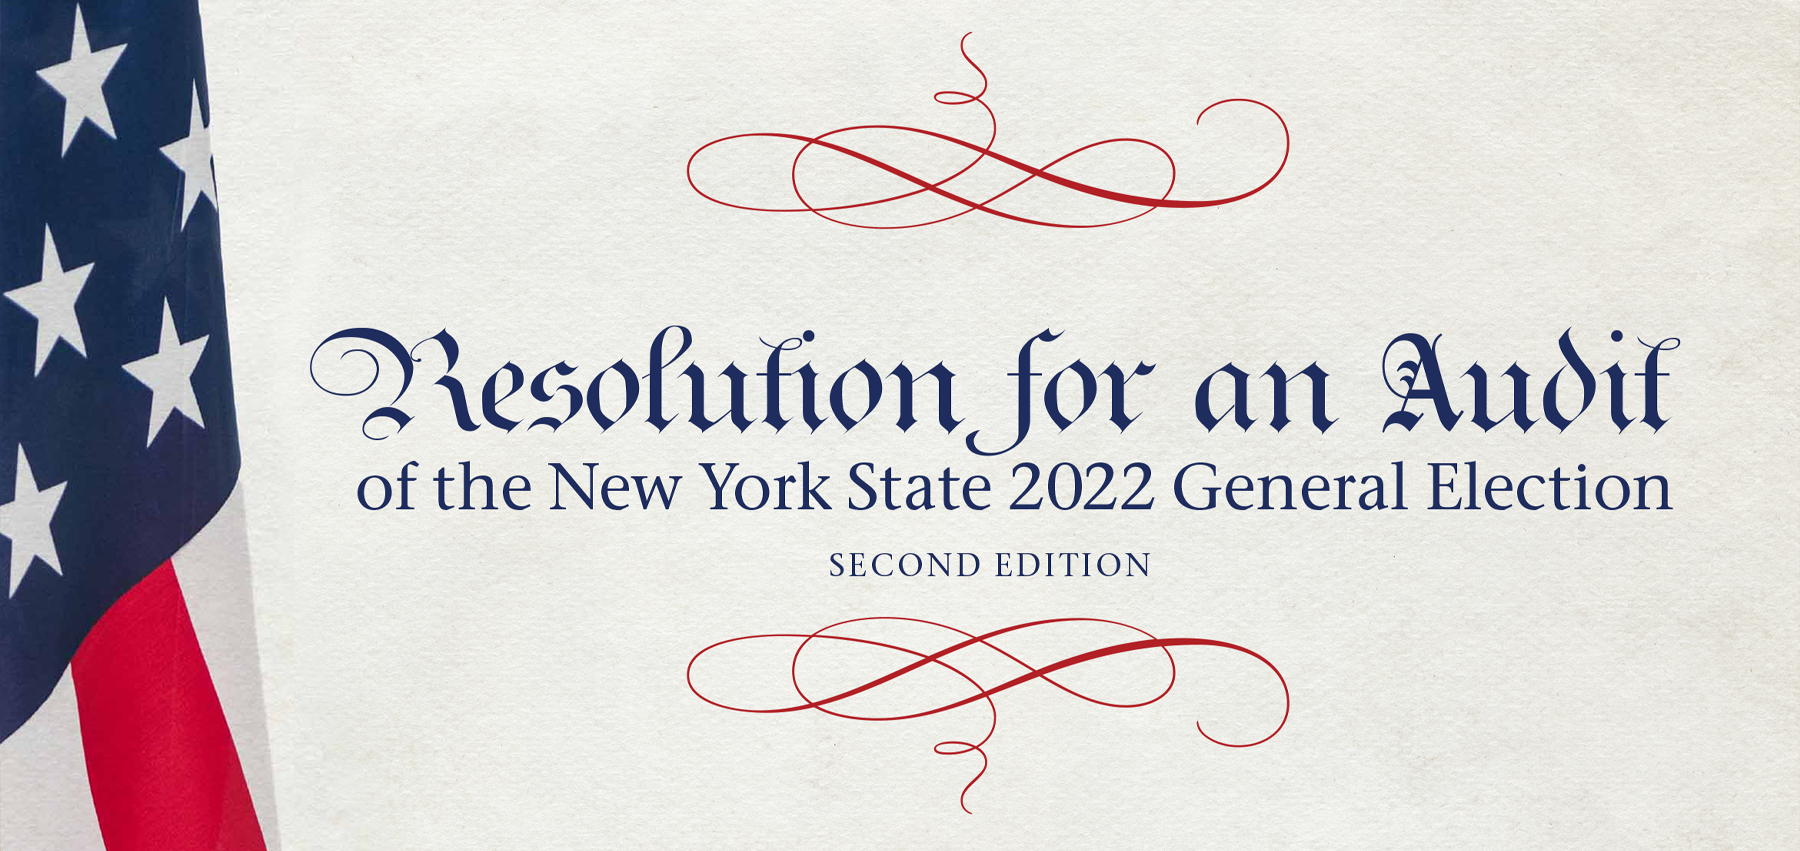 NY Citizens Audit: Resolution for an Audit